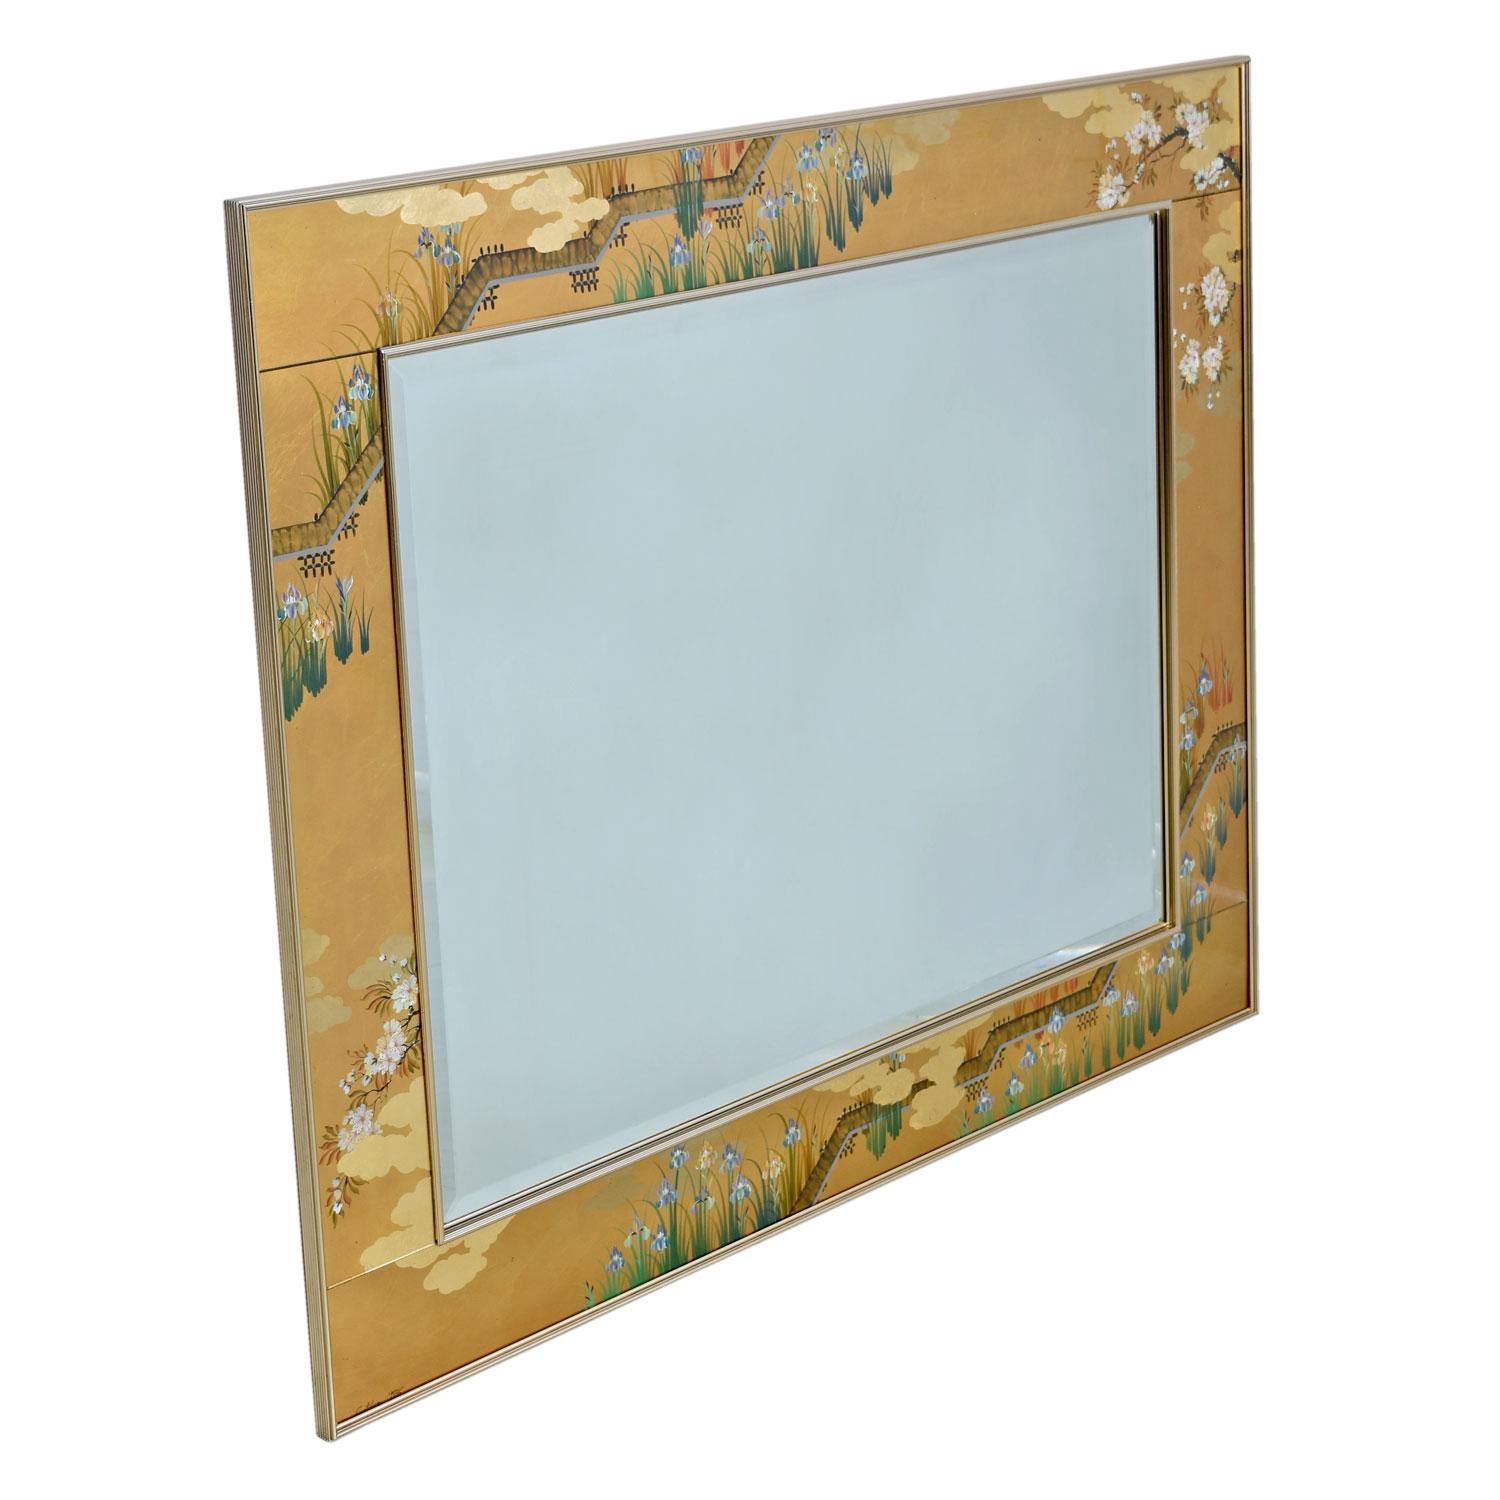 Hollywood Regency and Eastern chinoiserie styles combine to inspire the artist at Labarge who created this exquisite mirror. As if gold leaf overlay on reverse painted glass isn't glamorous enough, this beveled mirror is framed out by two brass